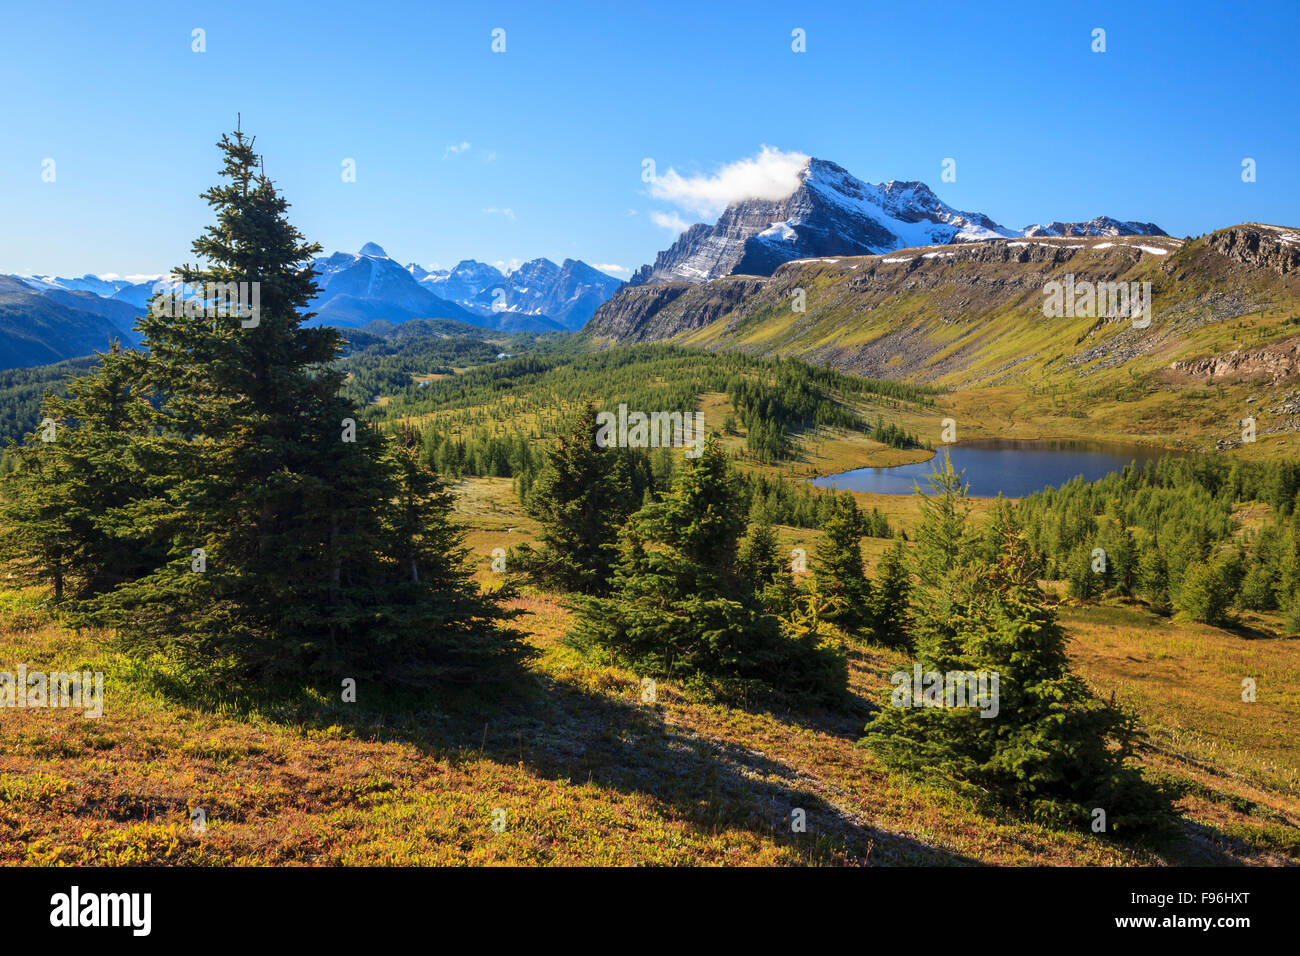 The Monarch and the Ramparts viewed from Healy Pass in Banff National Park, Alberta, Canada. Stock Photo